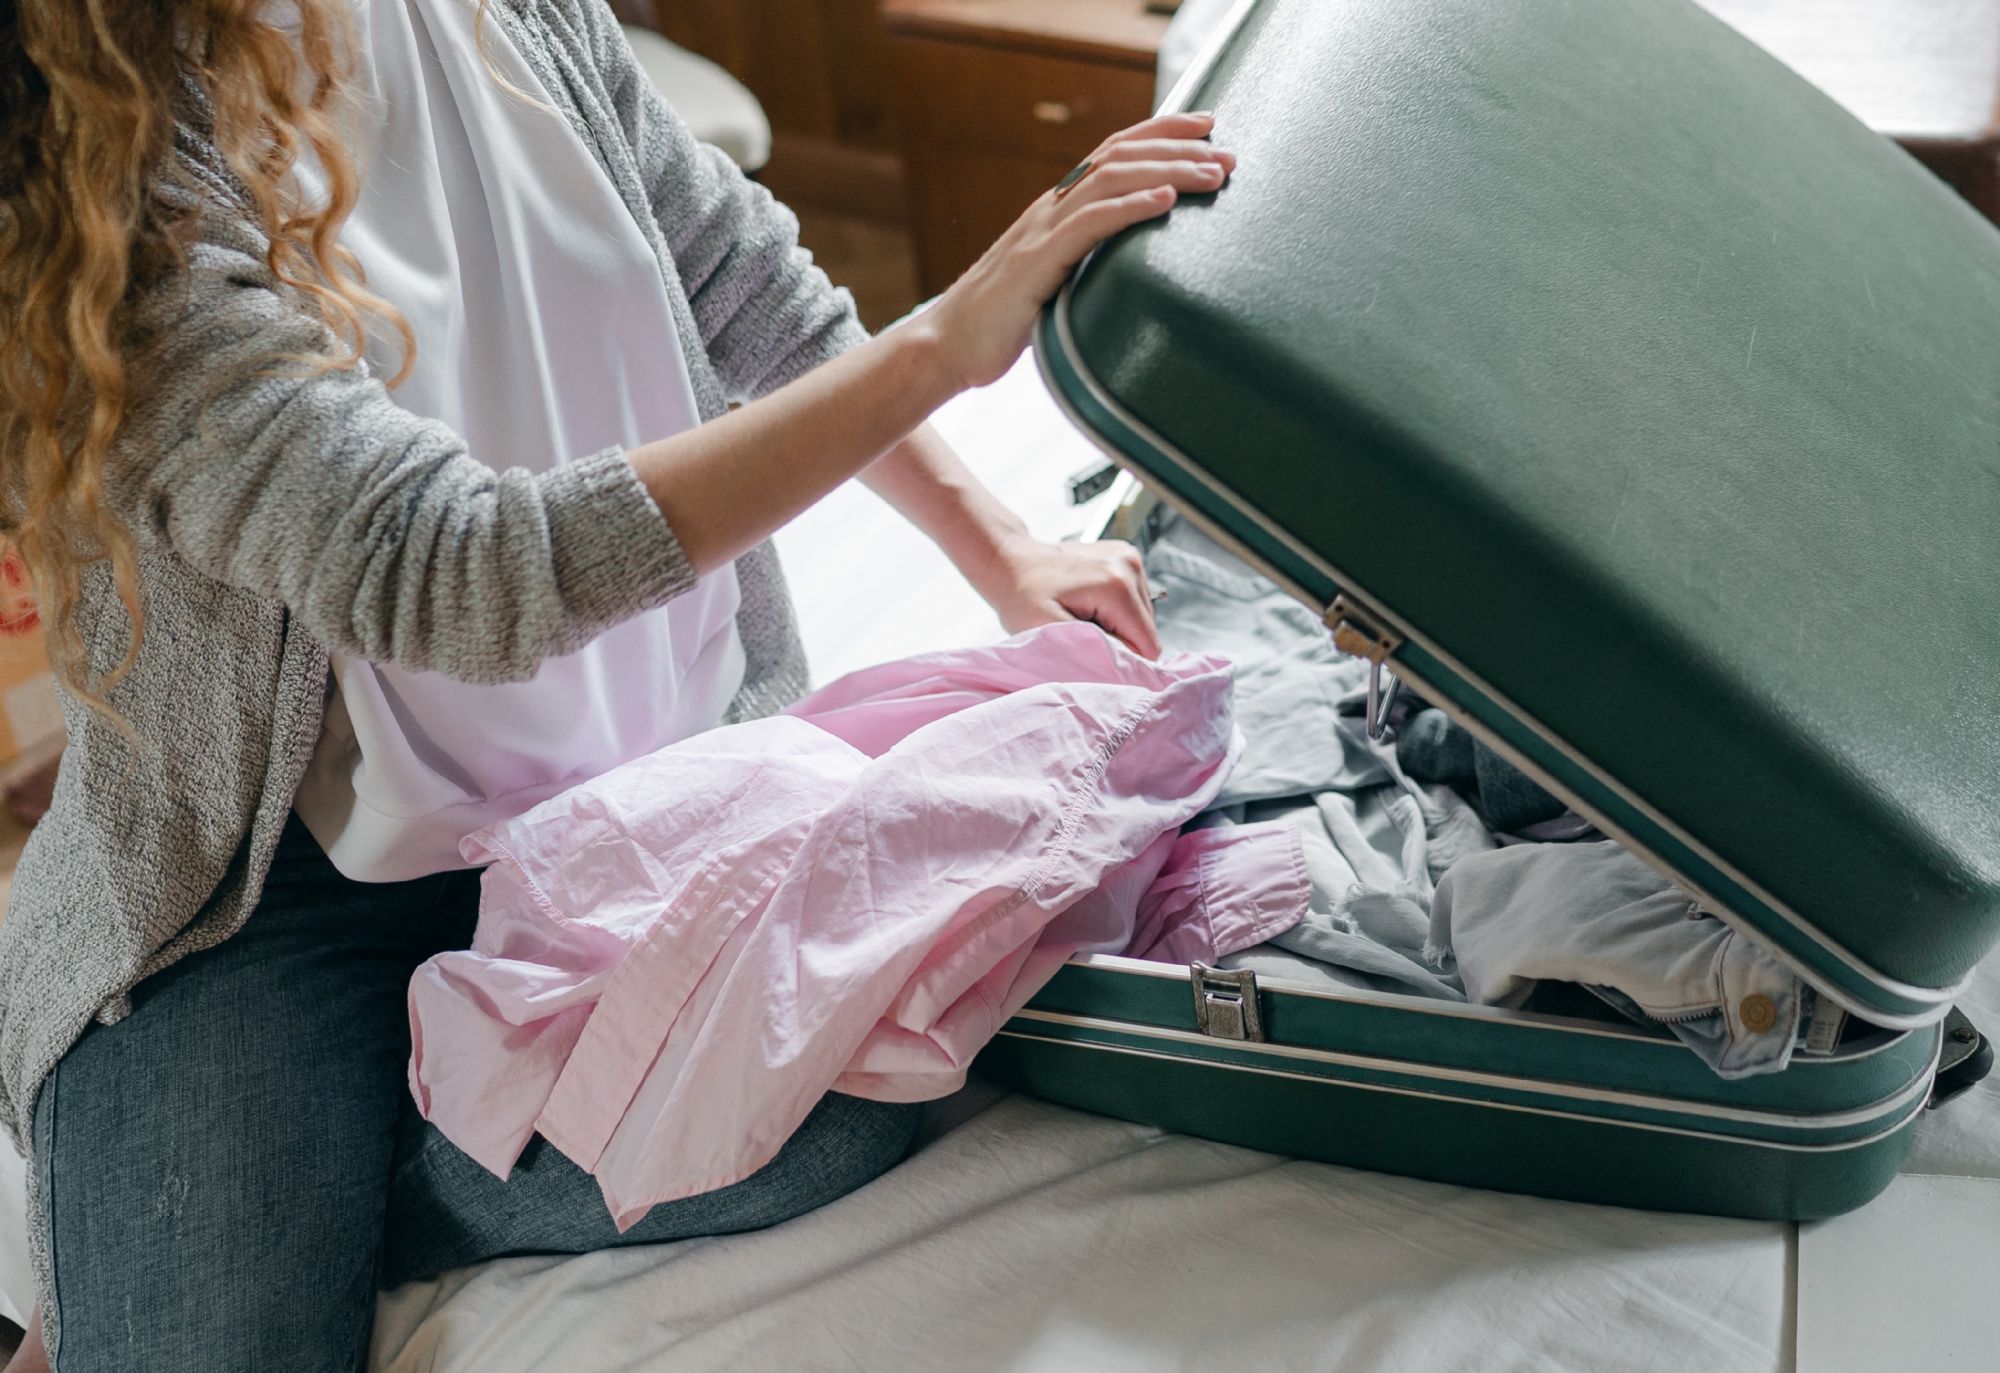 What to pack for your hospital stay